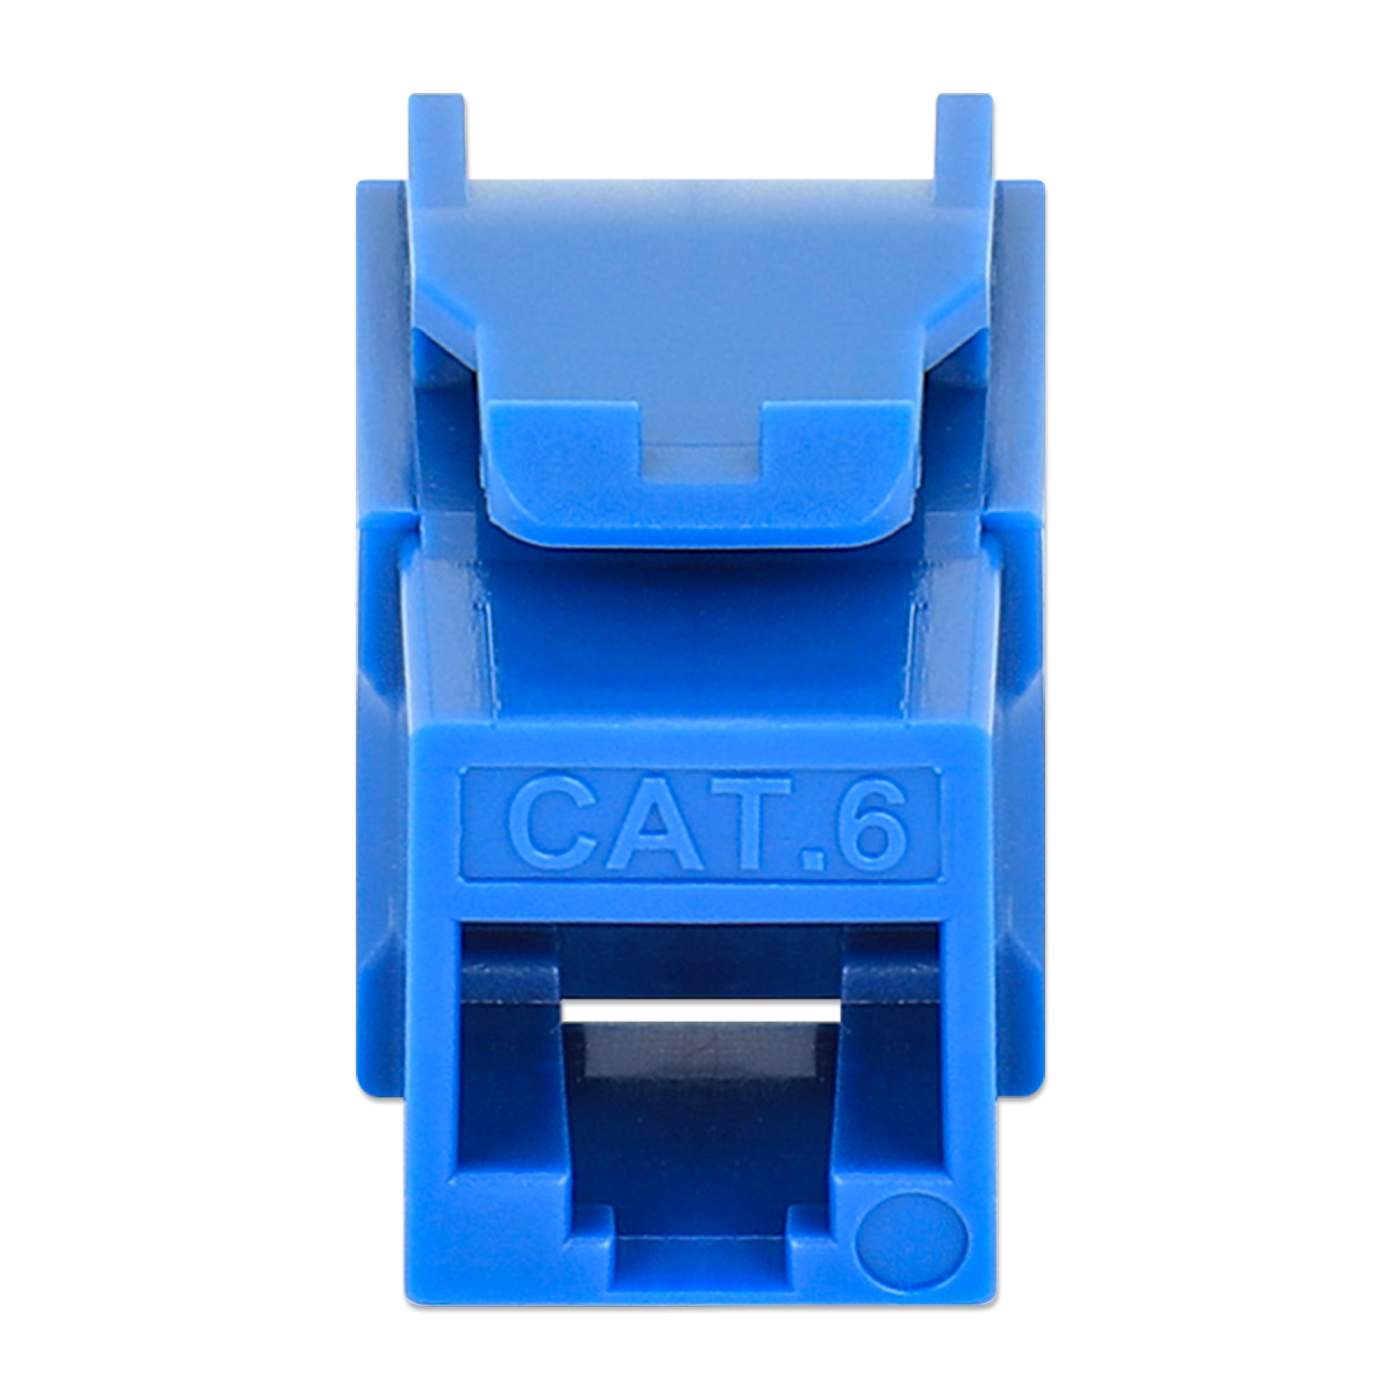 Cat6 Slim Keystone Jack with Punch-Down Stand, Blue, 25-Pack Image 4